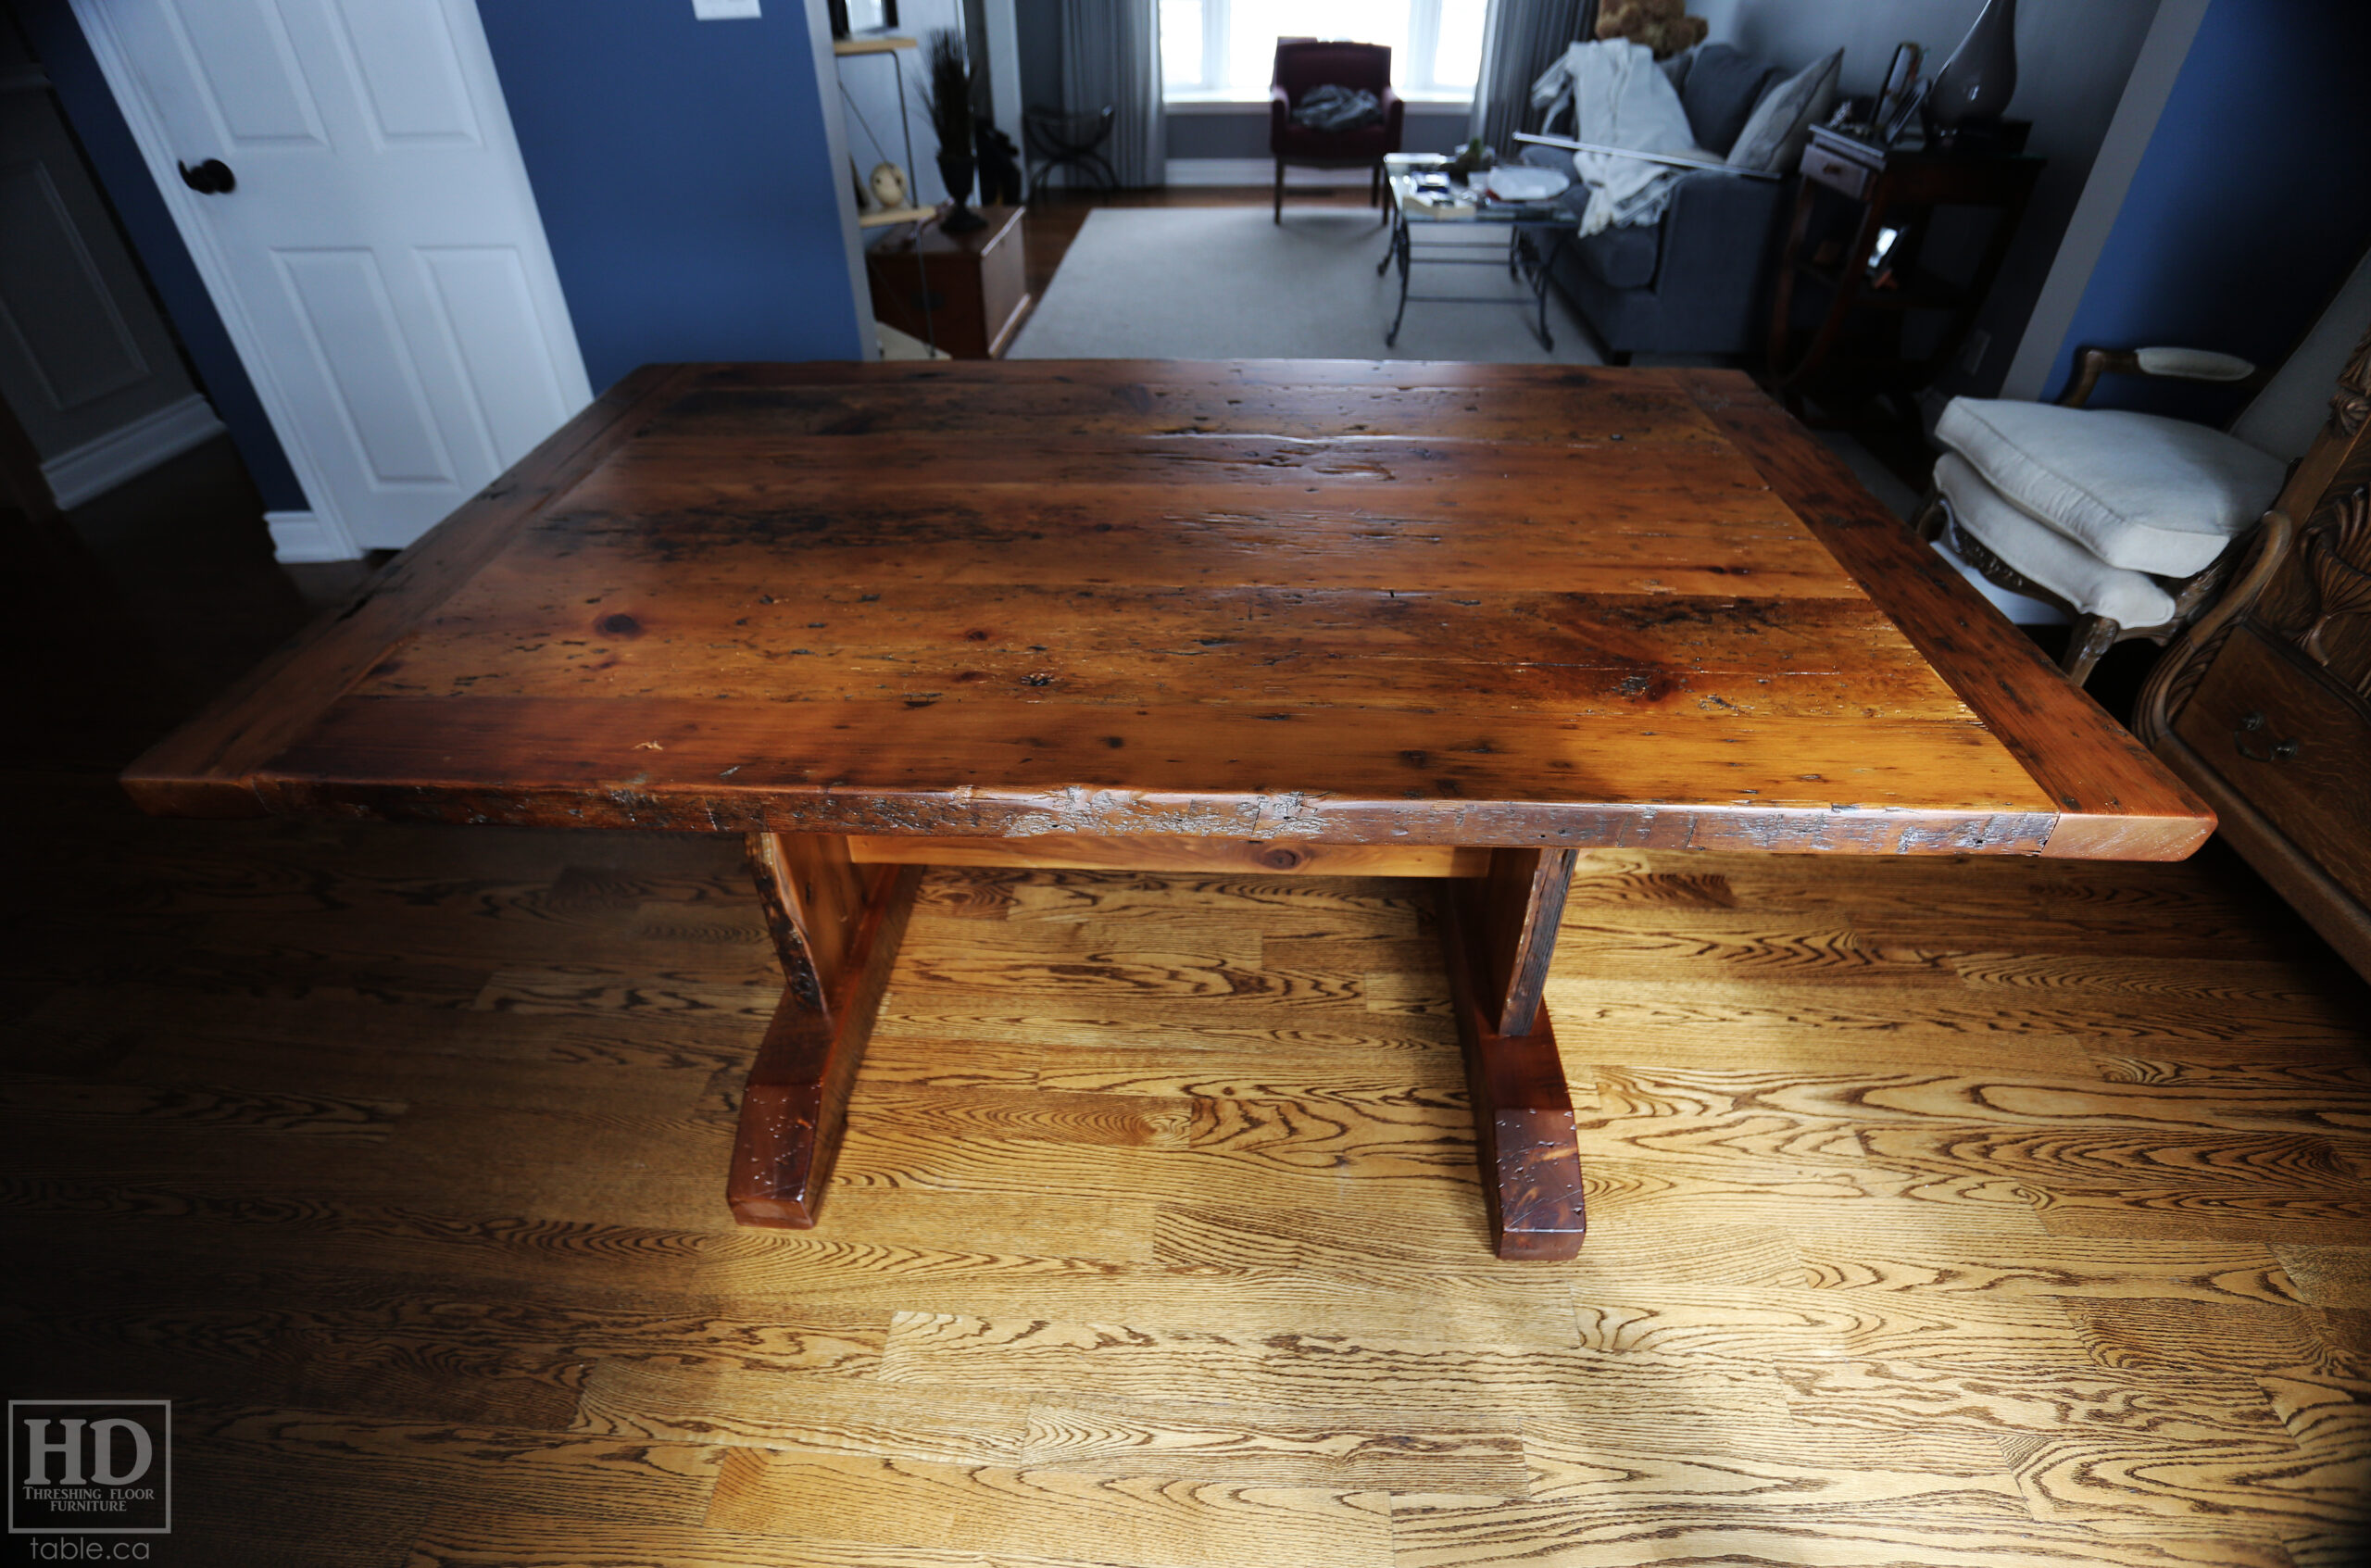 Distressed Wood Table with Polyurethane Finish [No Epoxy] by HD Threshing Floor Furniture / www.table.ca